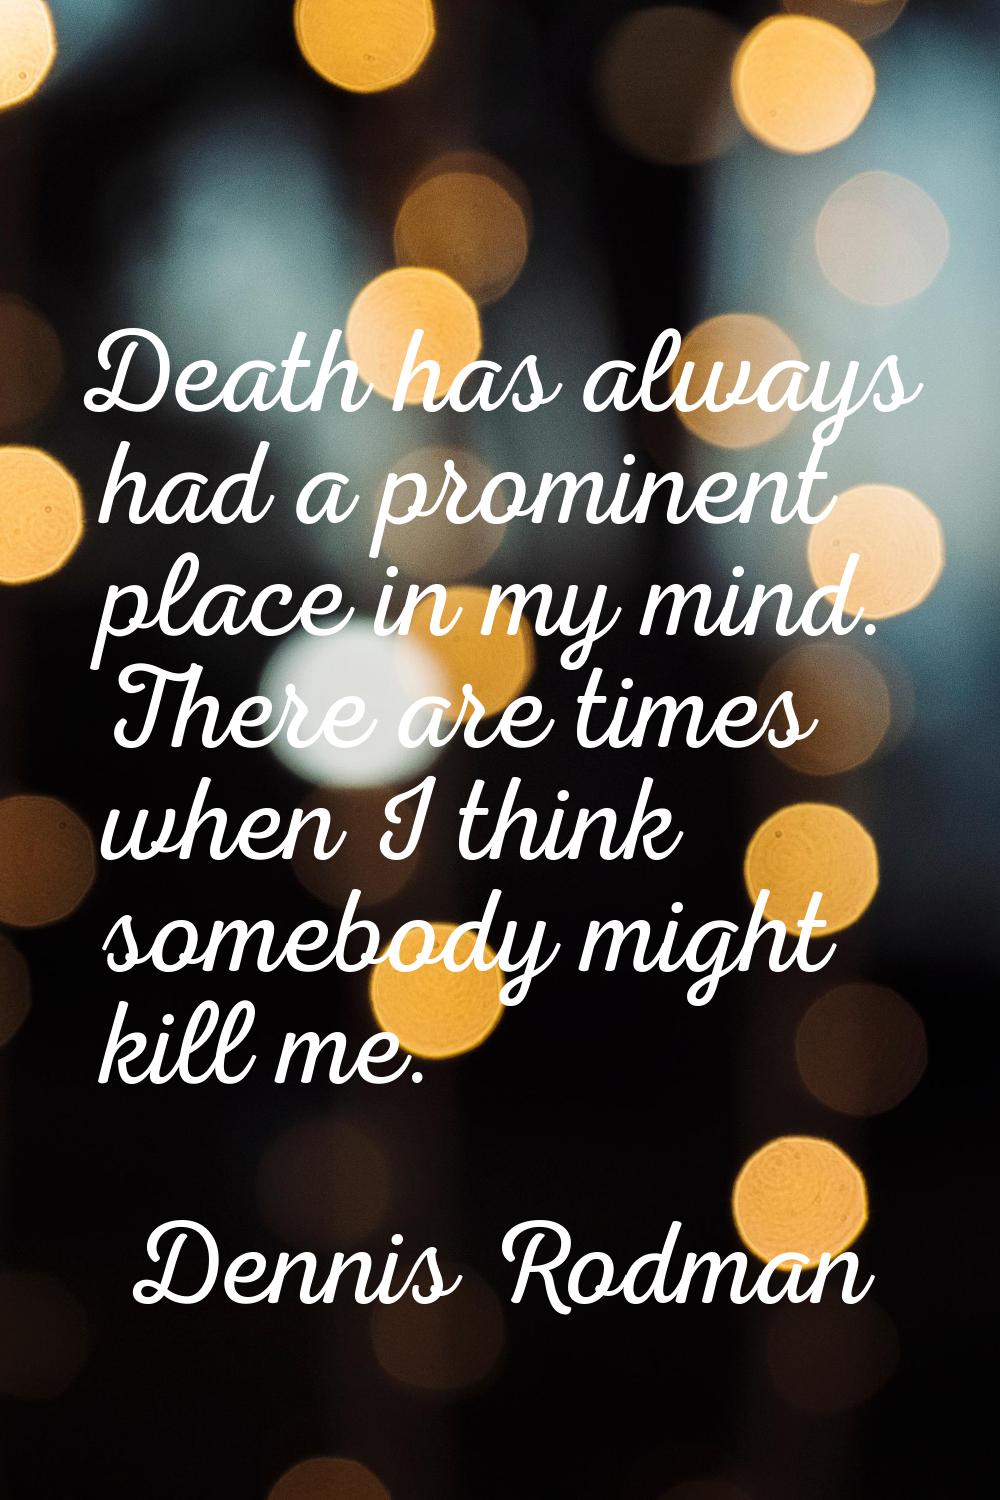 Death has always had a prominent place in my mind. There are times when I think somebody might kill